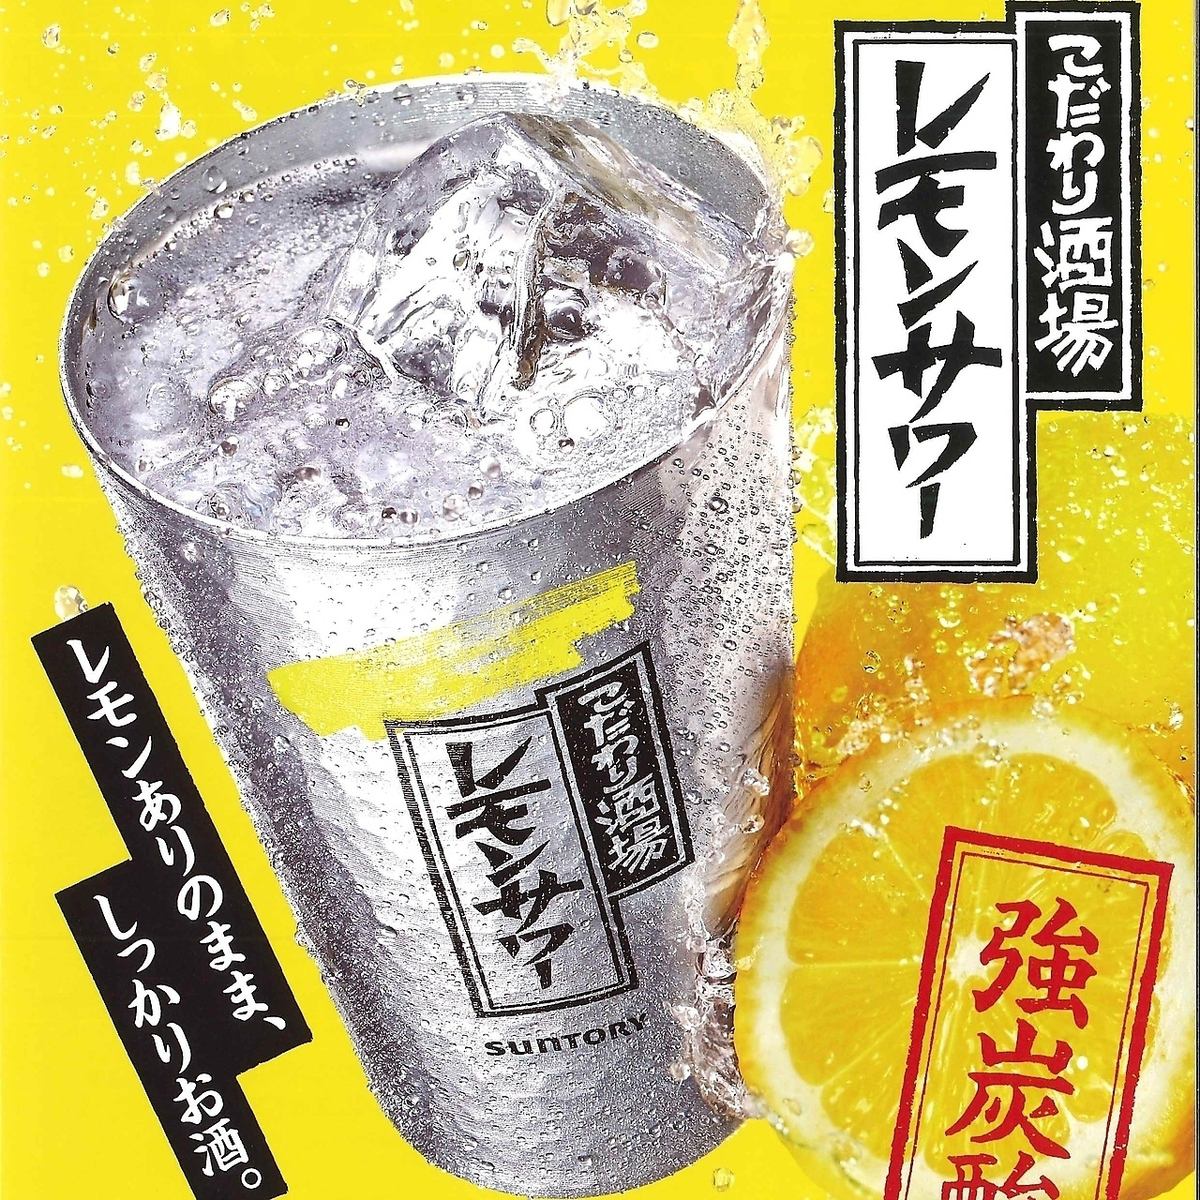 No matter how many glasses of lemon sour you drink at the specialty bar, it's only 50 yen!